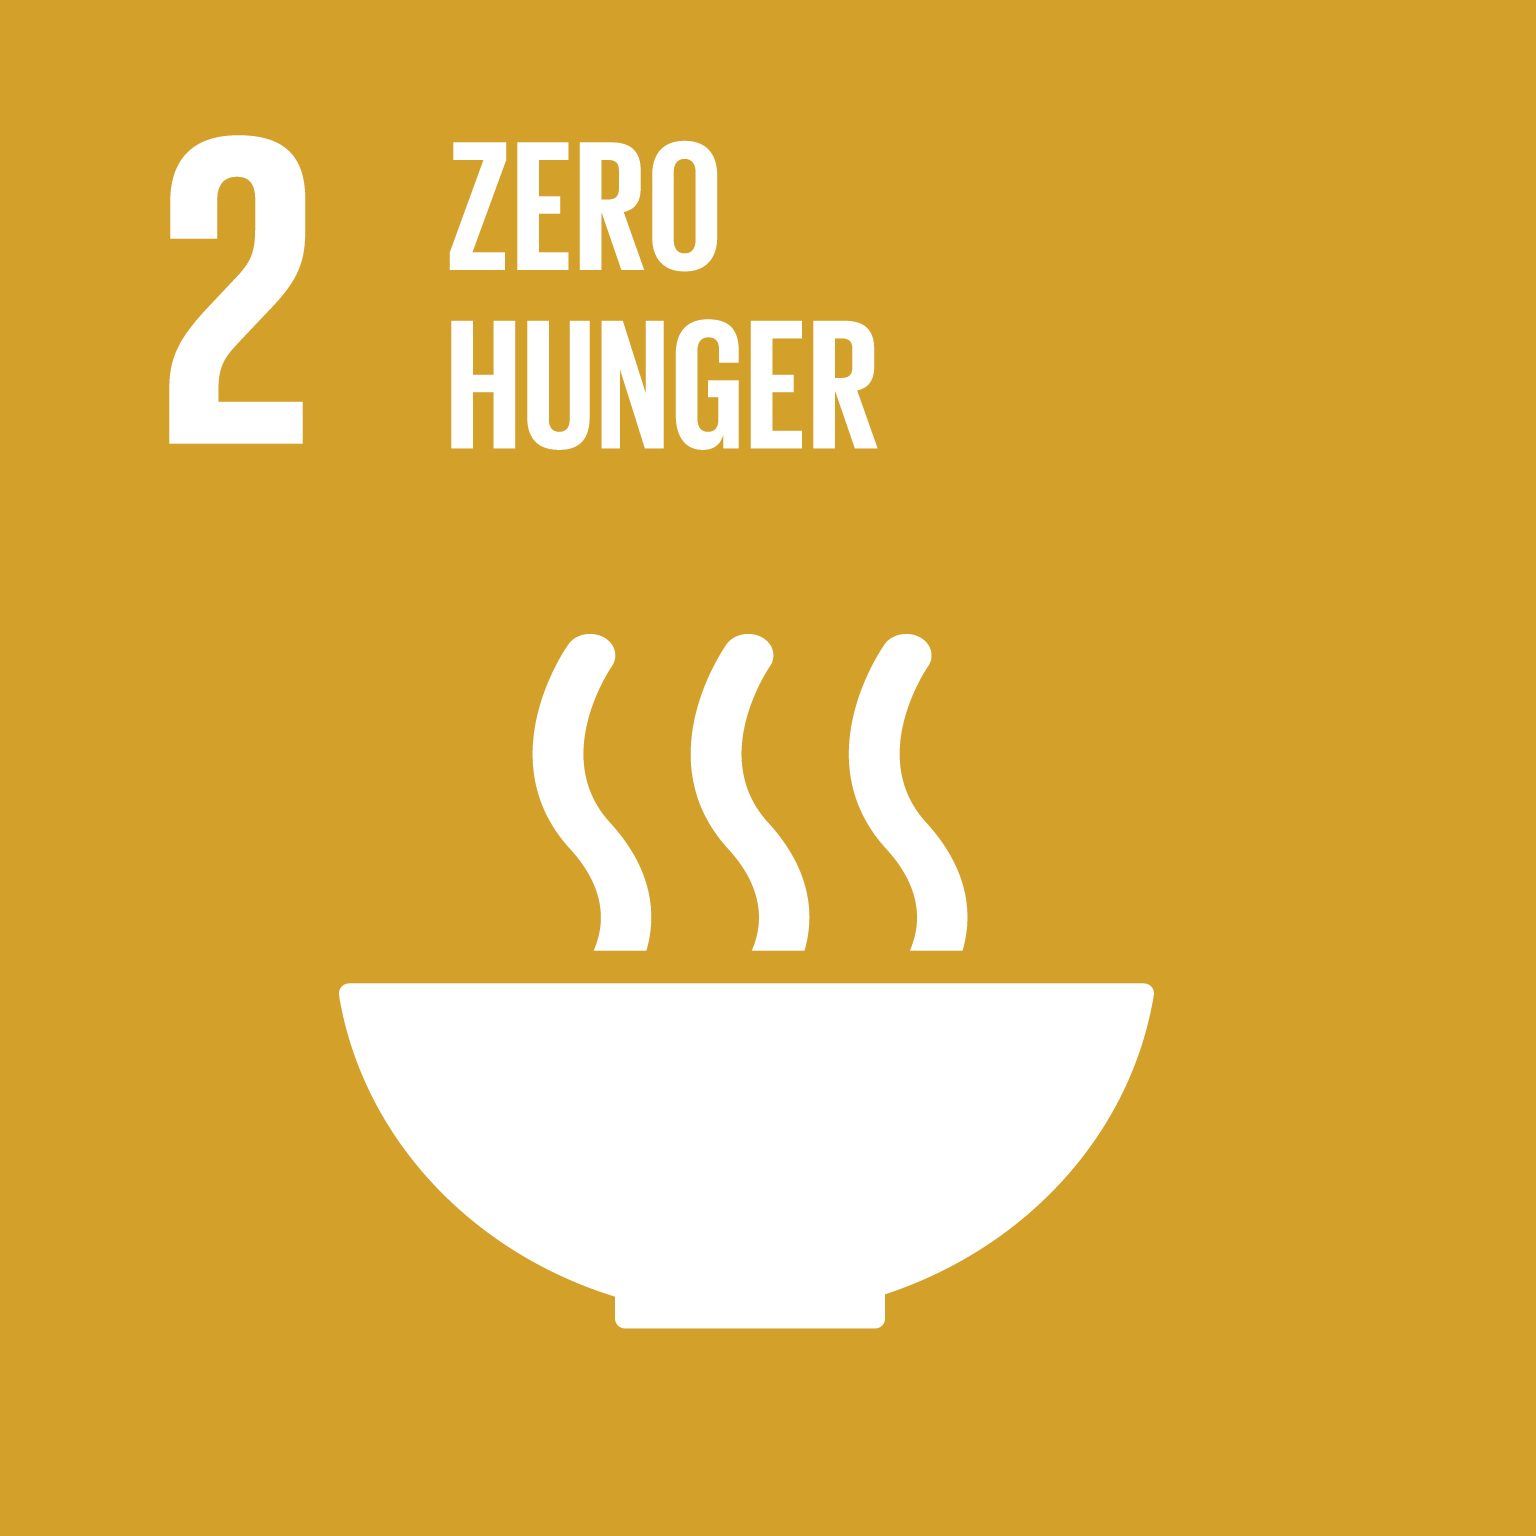 Goal 2: Zero Hunger, the text of this infographic is listed below